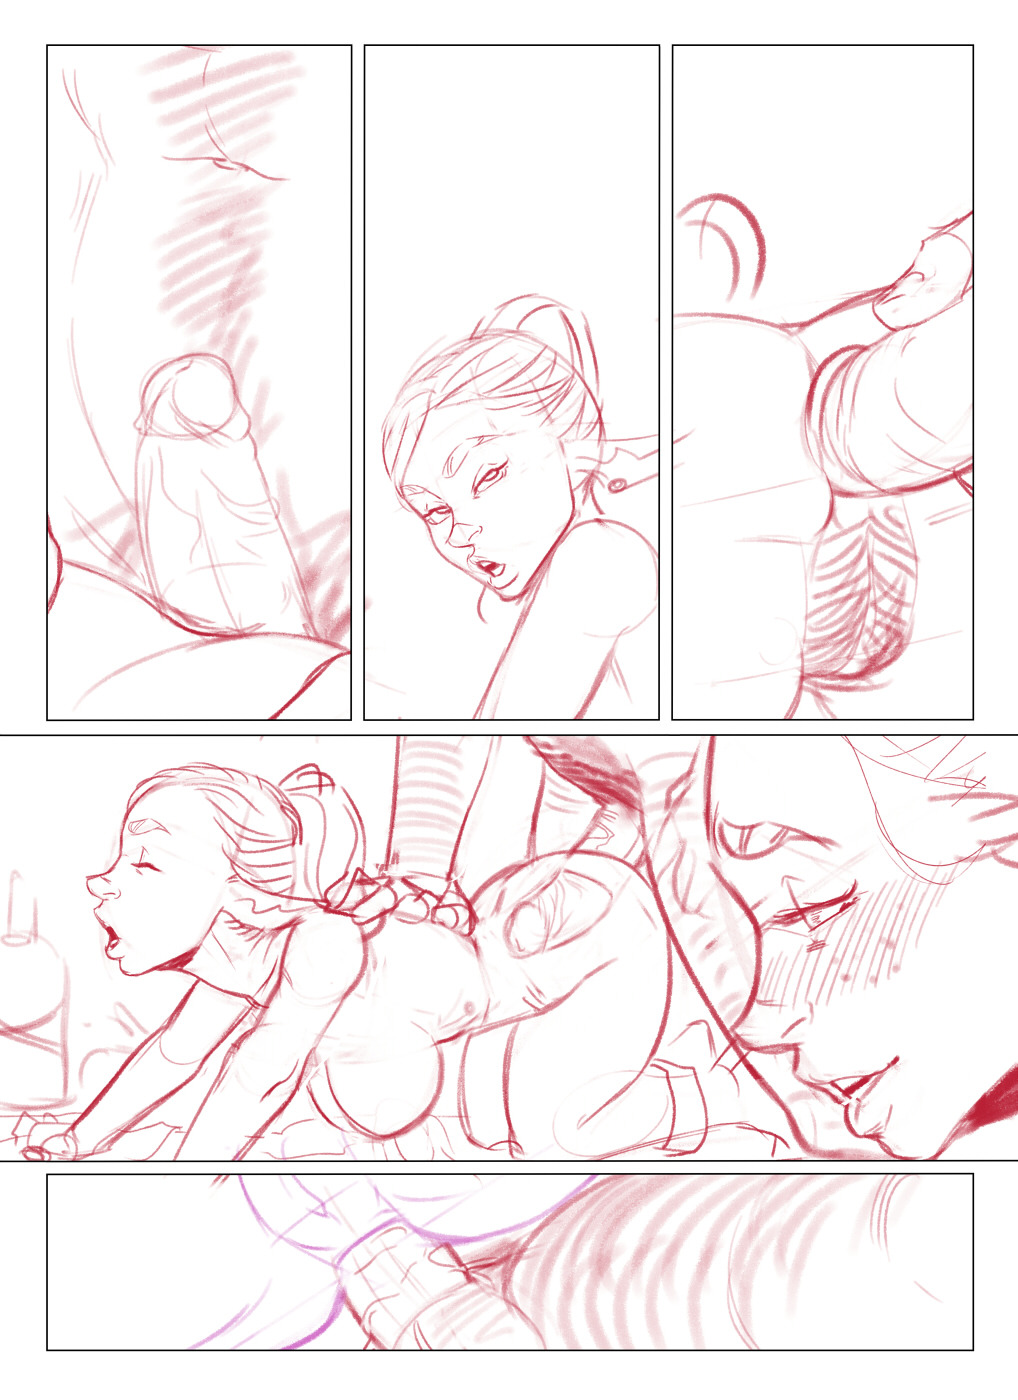 I started working on that long ago promised Melly anal scene. 6 pages, gonna run